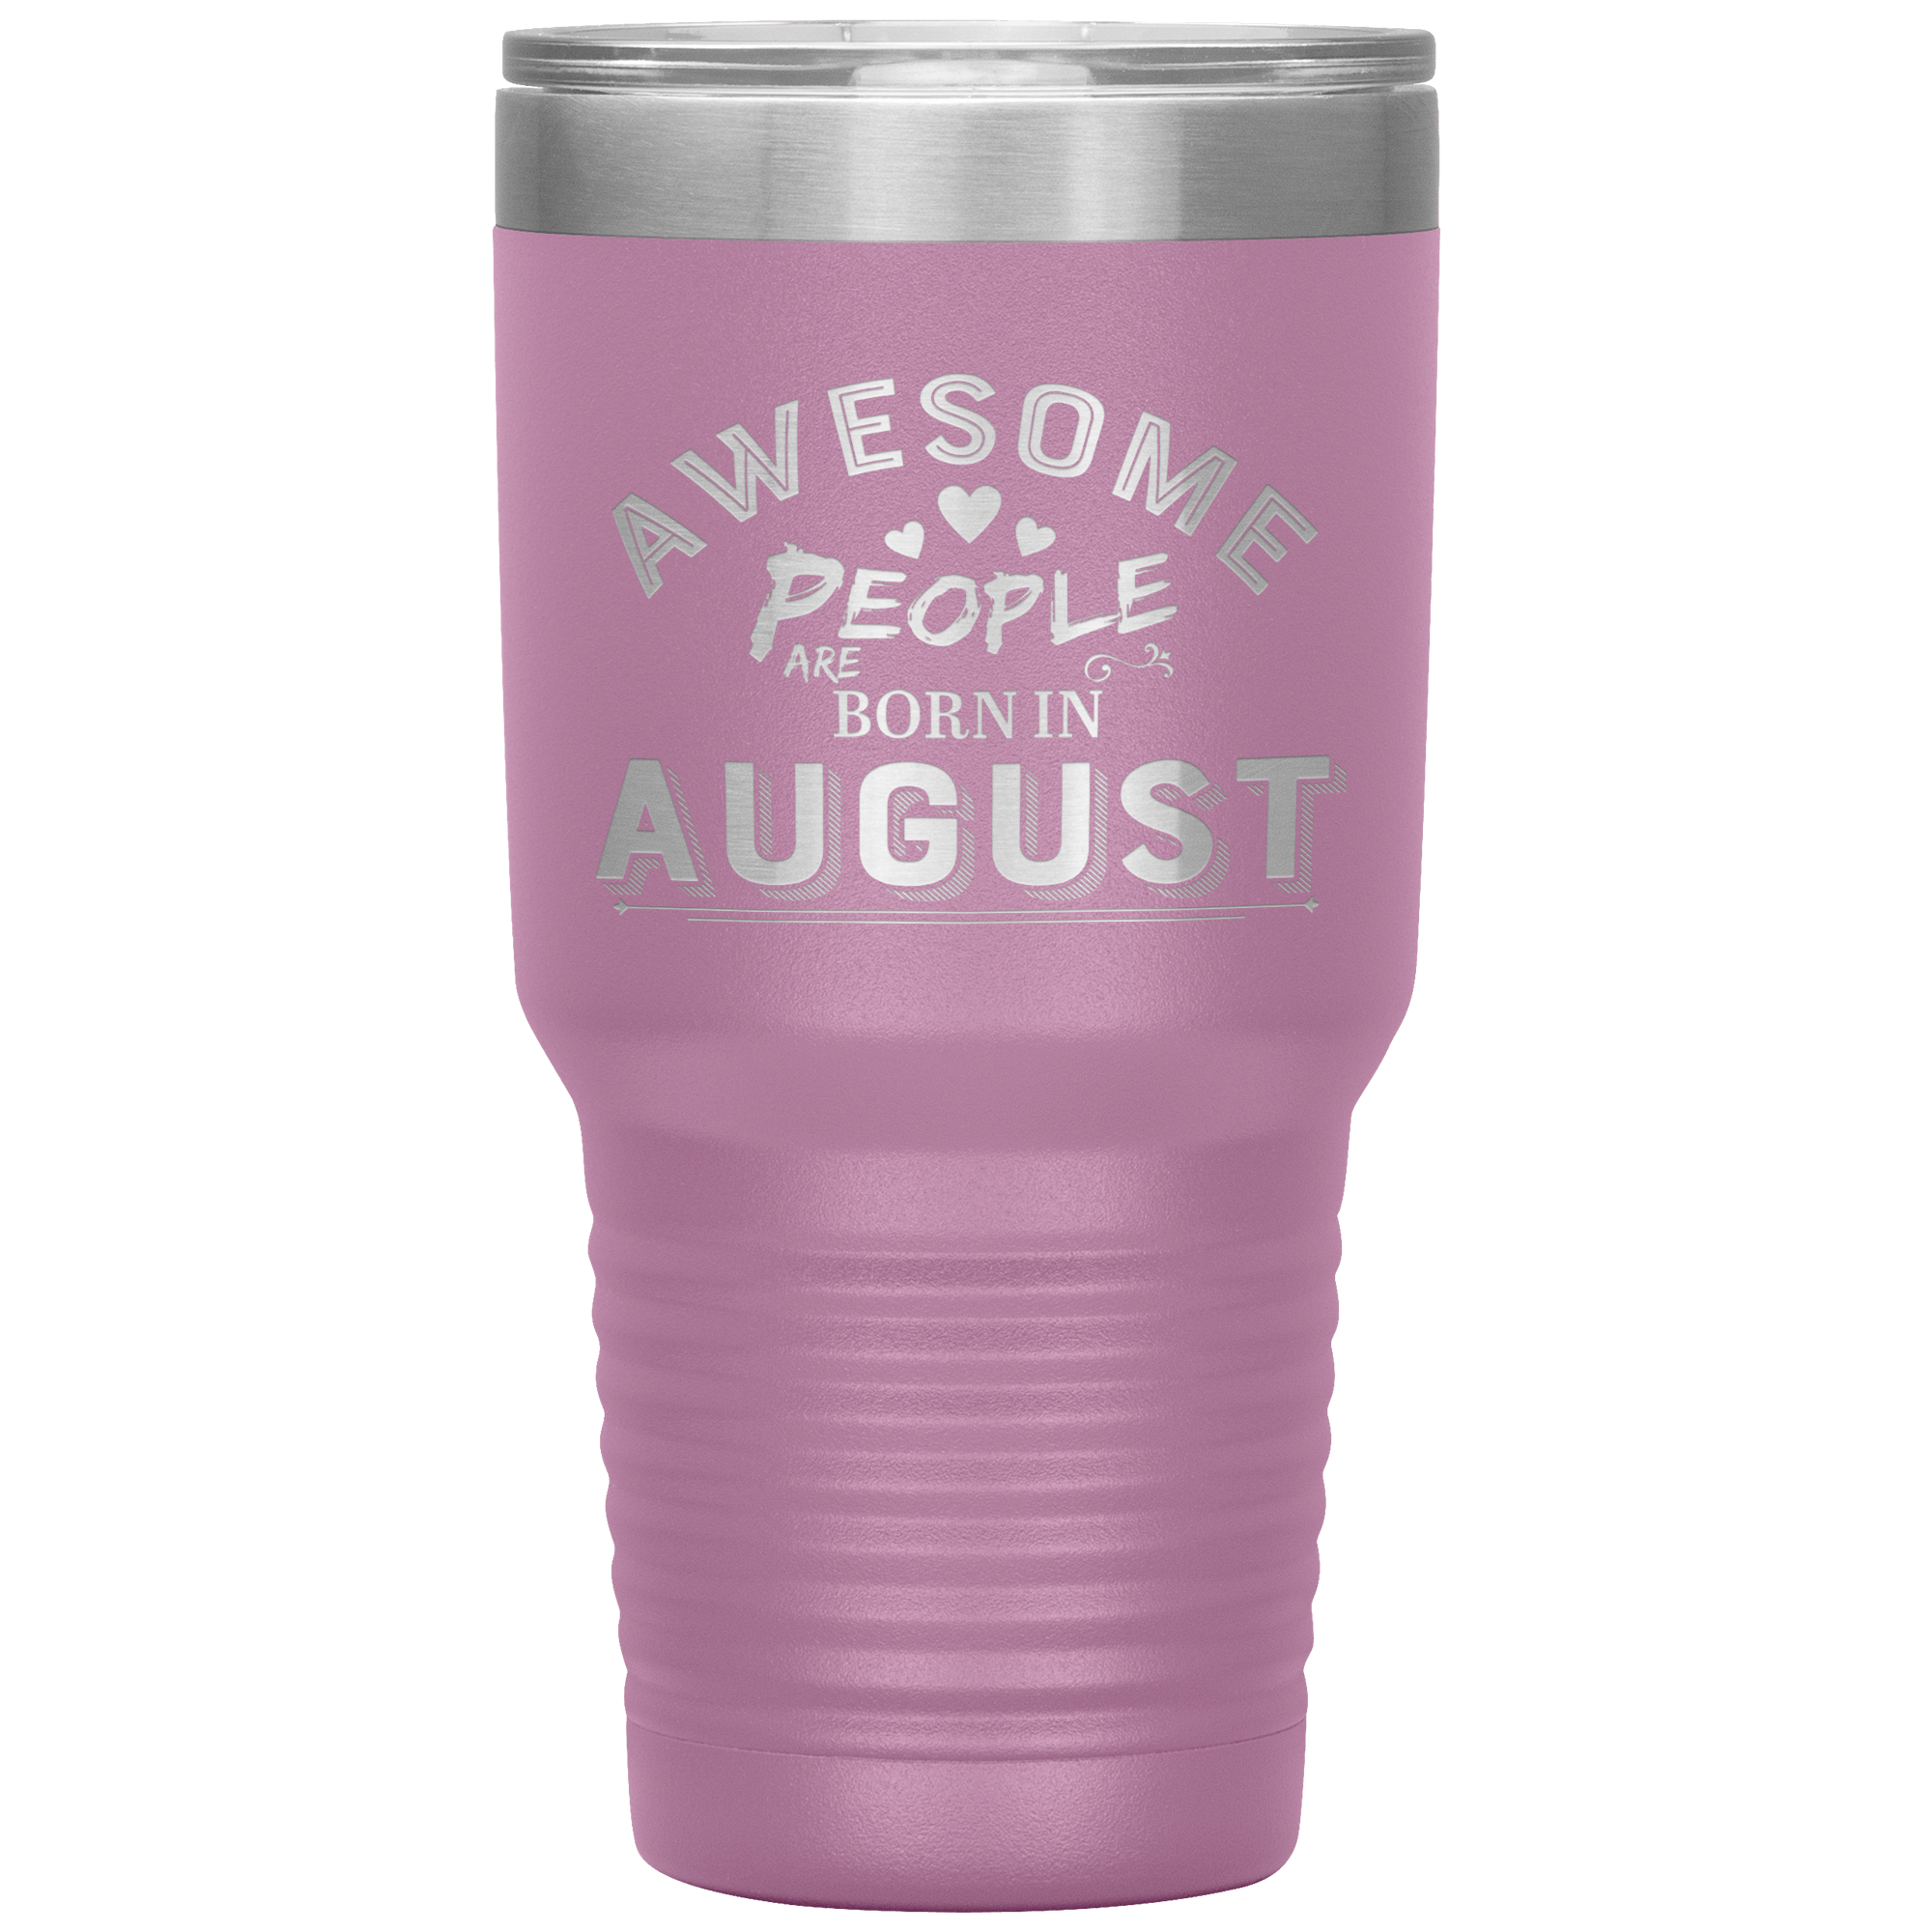 "AWESOME PEOPLE ARE BORN IN AUGUST" Tumbler